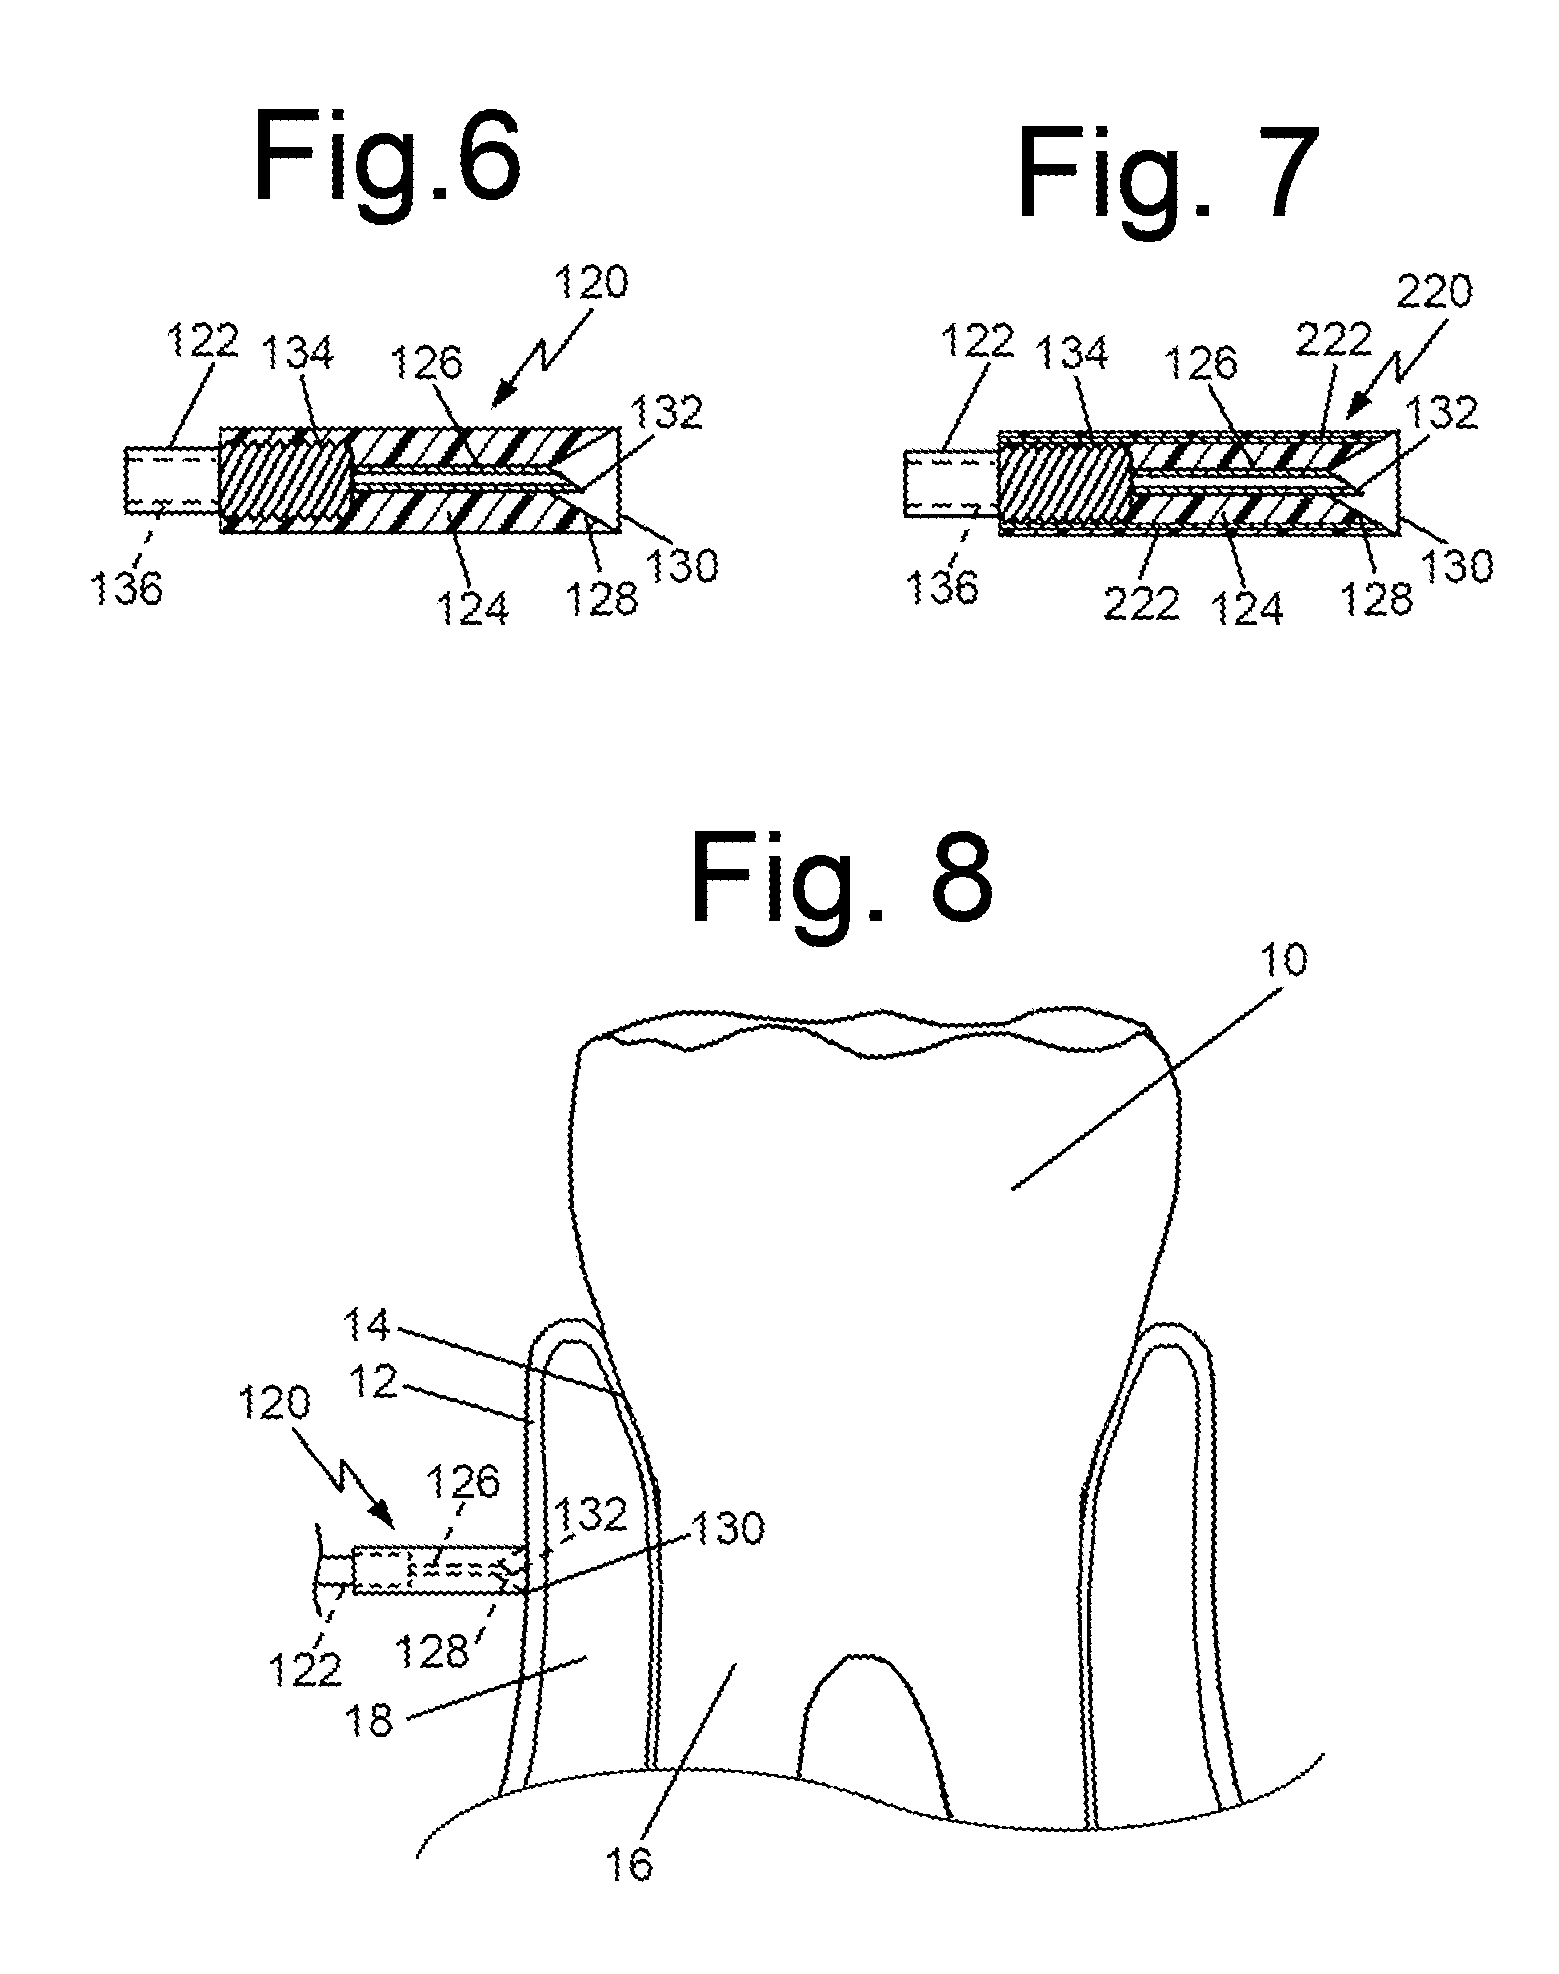 Anesthesia applicators/injectors for dental and other applications and methods of use